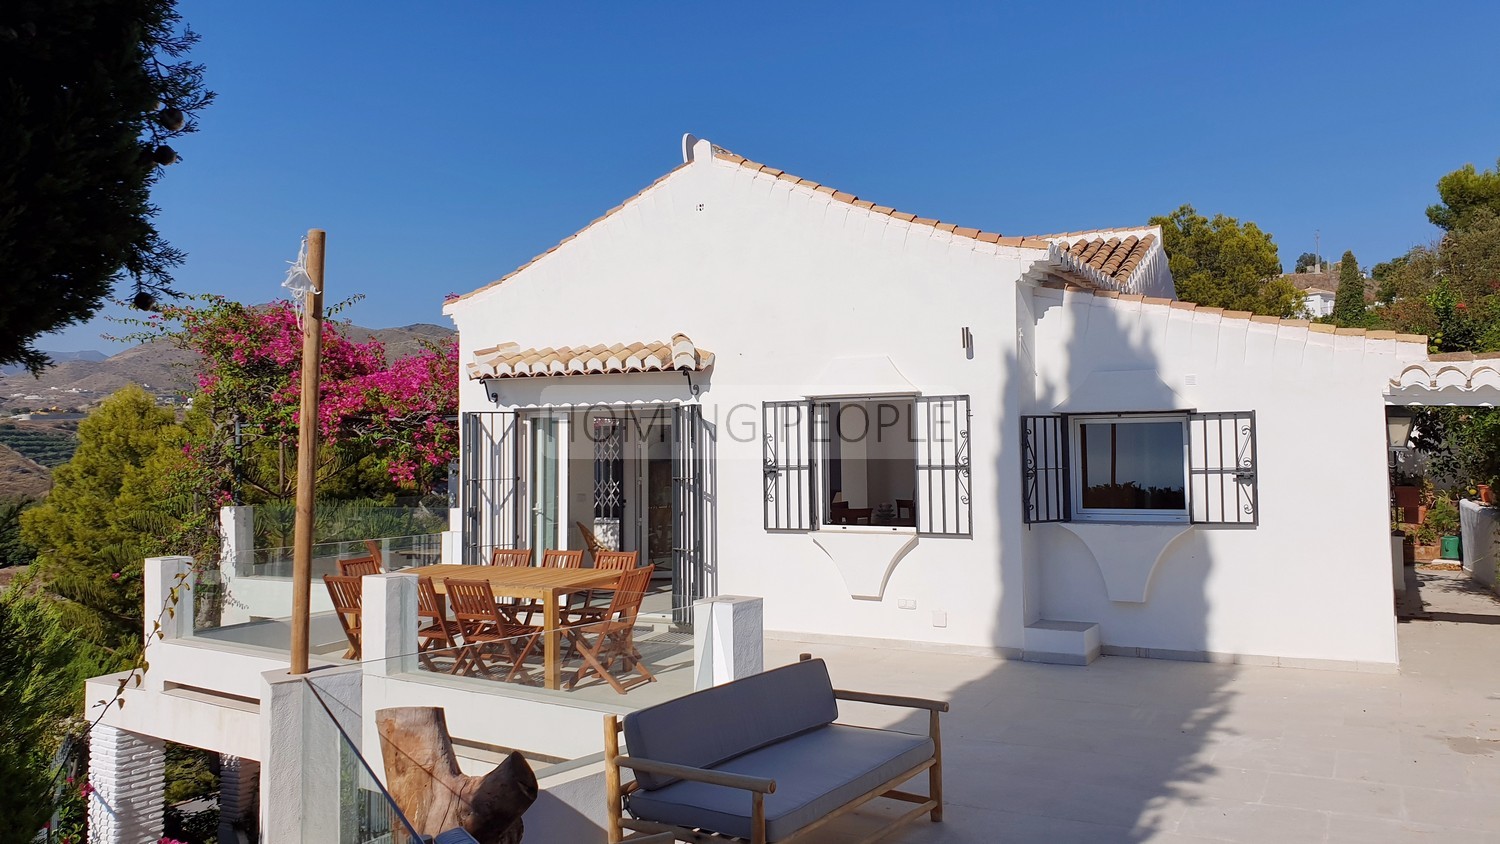 Charming, Andalusian-style villa: Greenery, terraces, swimming pool and wonderful views over the bay !